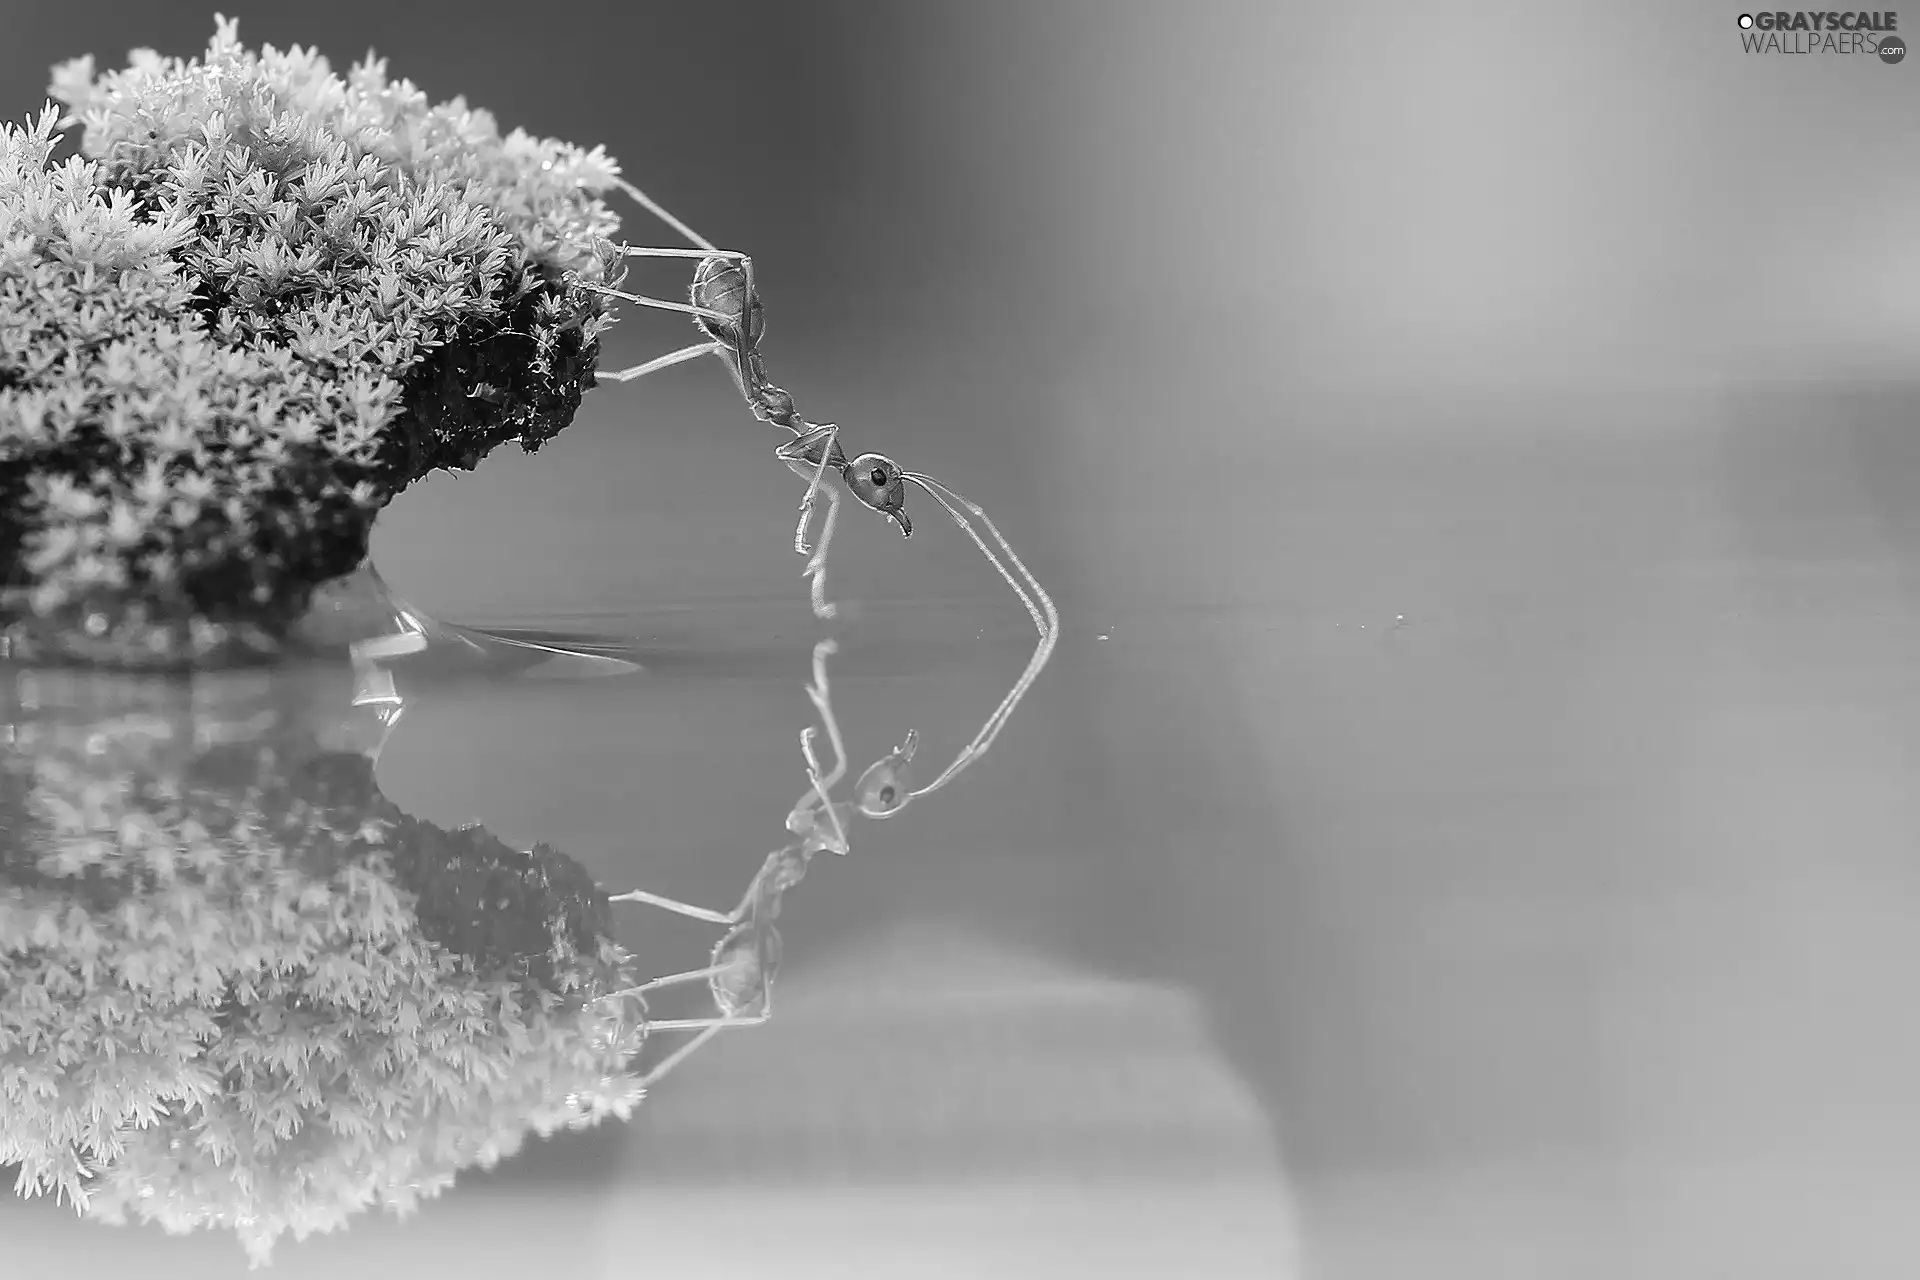 ant, water, reflection, Moss